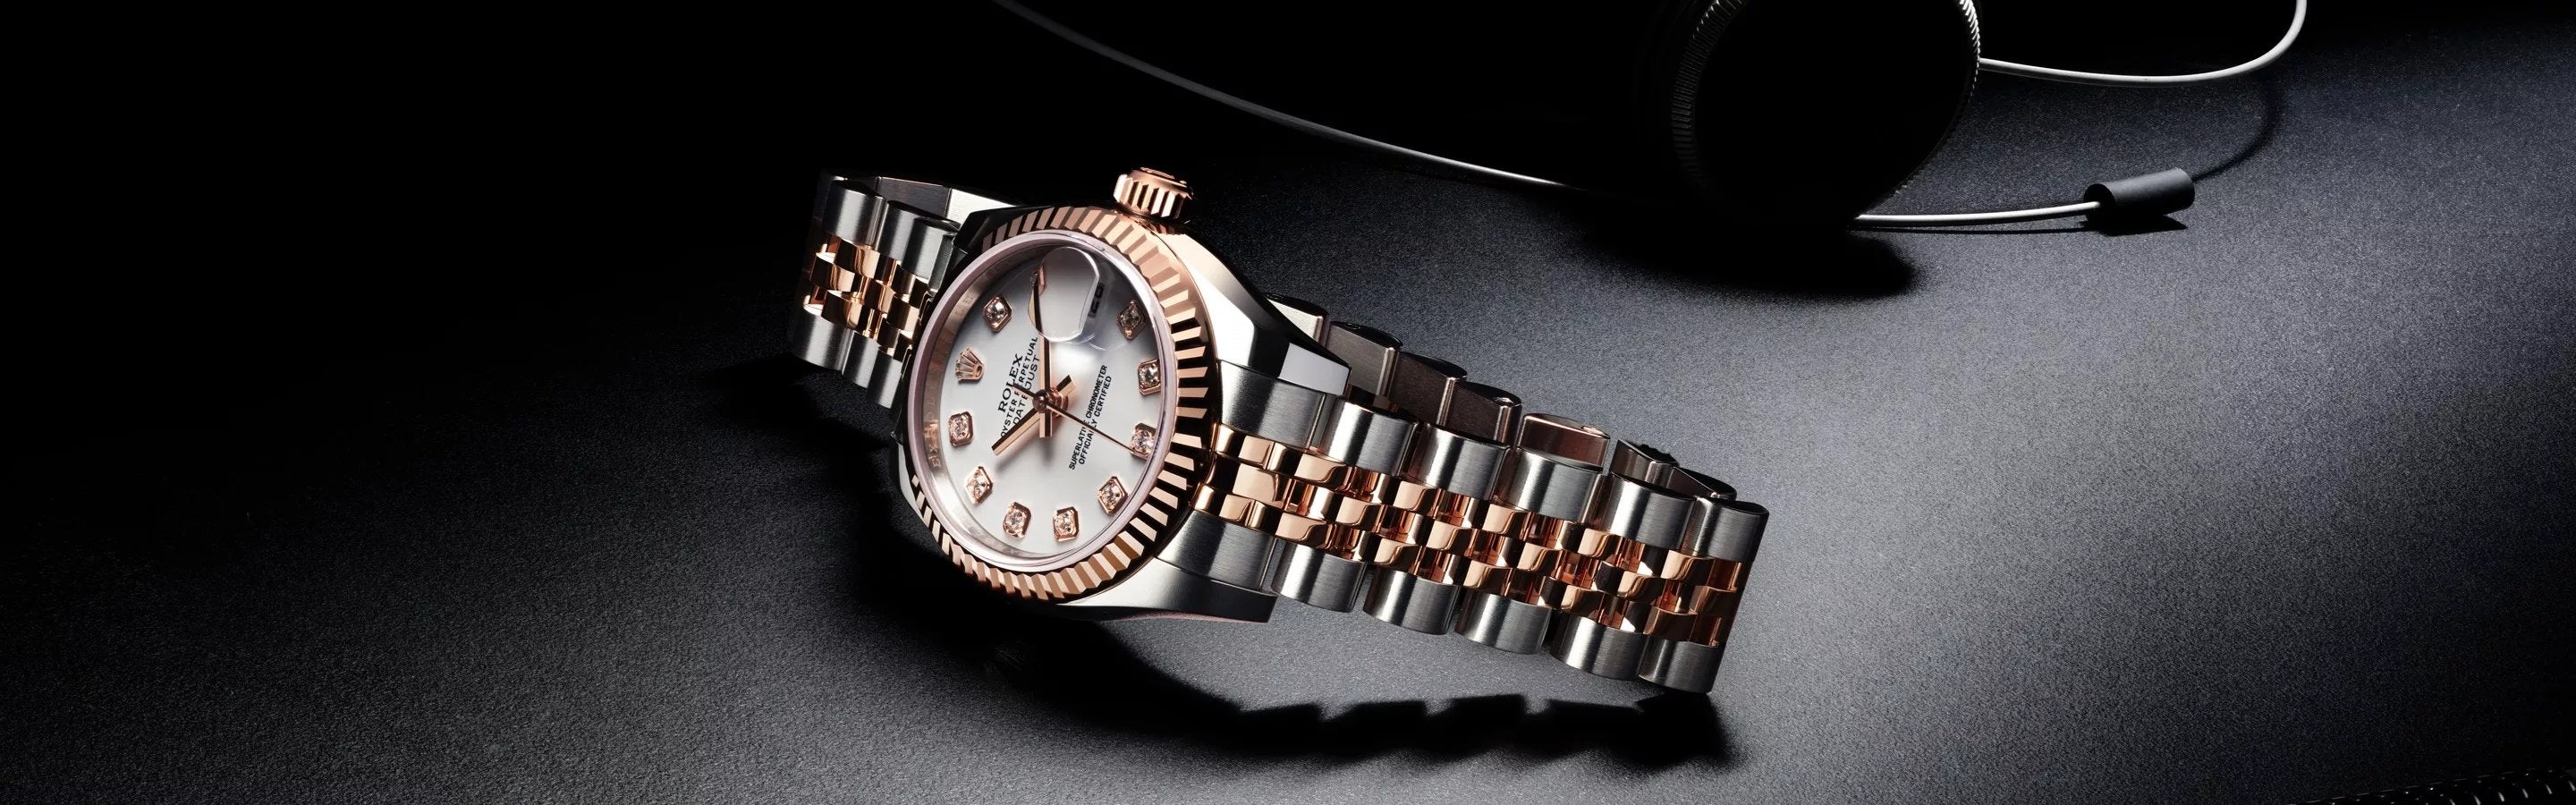 Rolex Certified Pre-Owned Banner